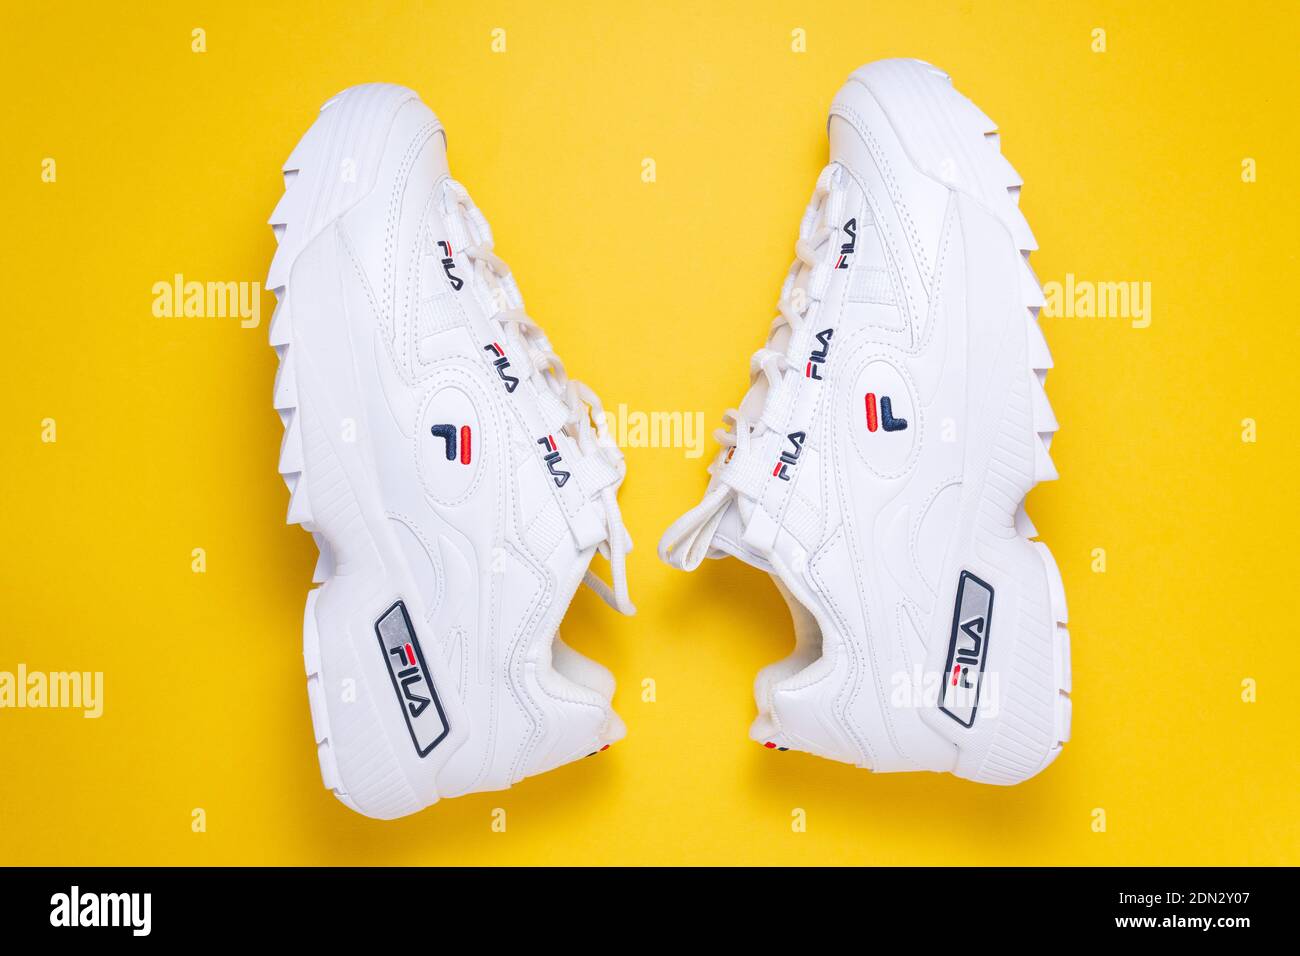 Tyumen, Russia-November 27, 2020: New Fila running shoes, white sneakers,  trainers shows logo Sport and casual footwear concept Stock Photo - Alamy